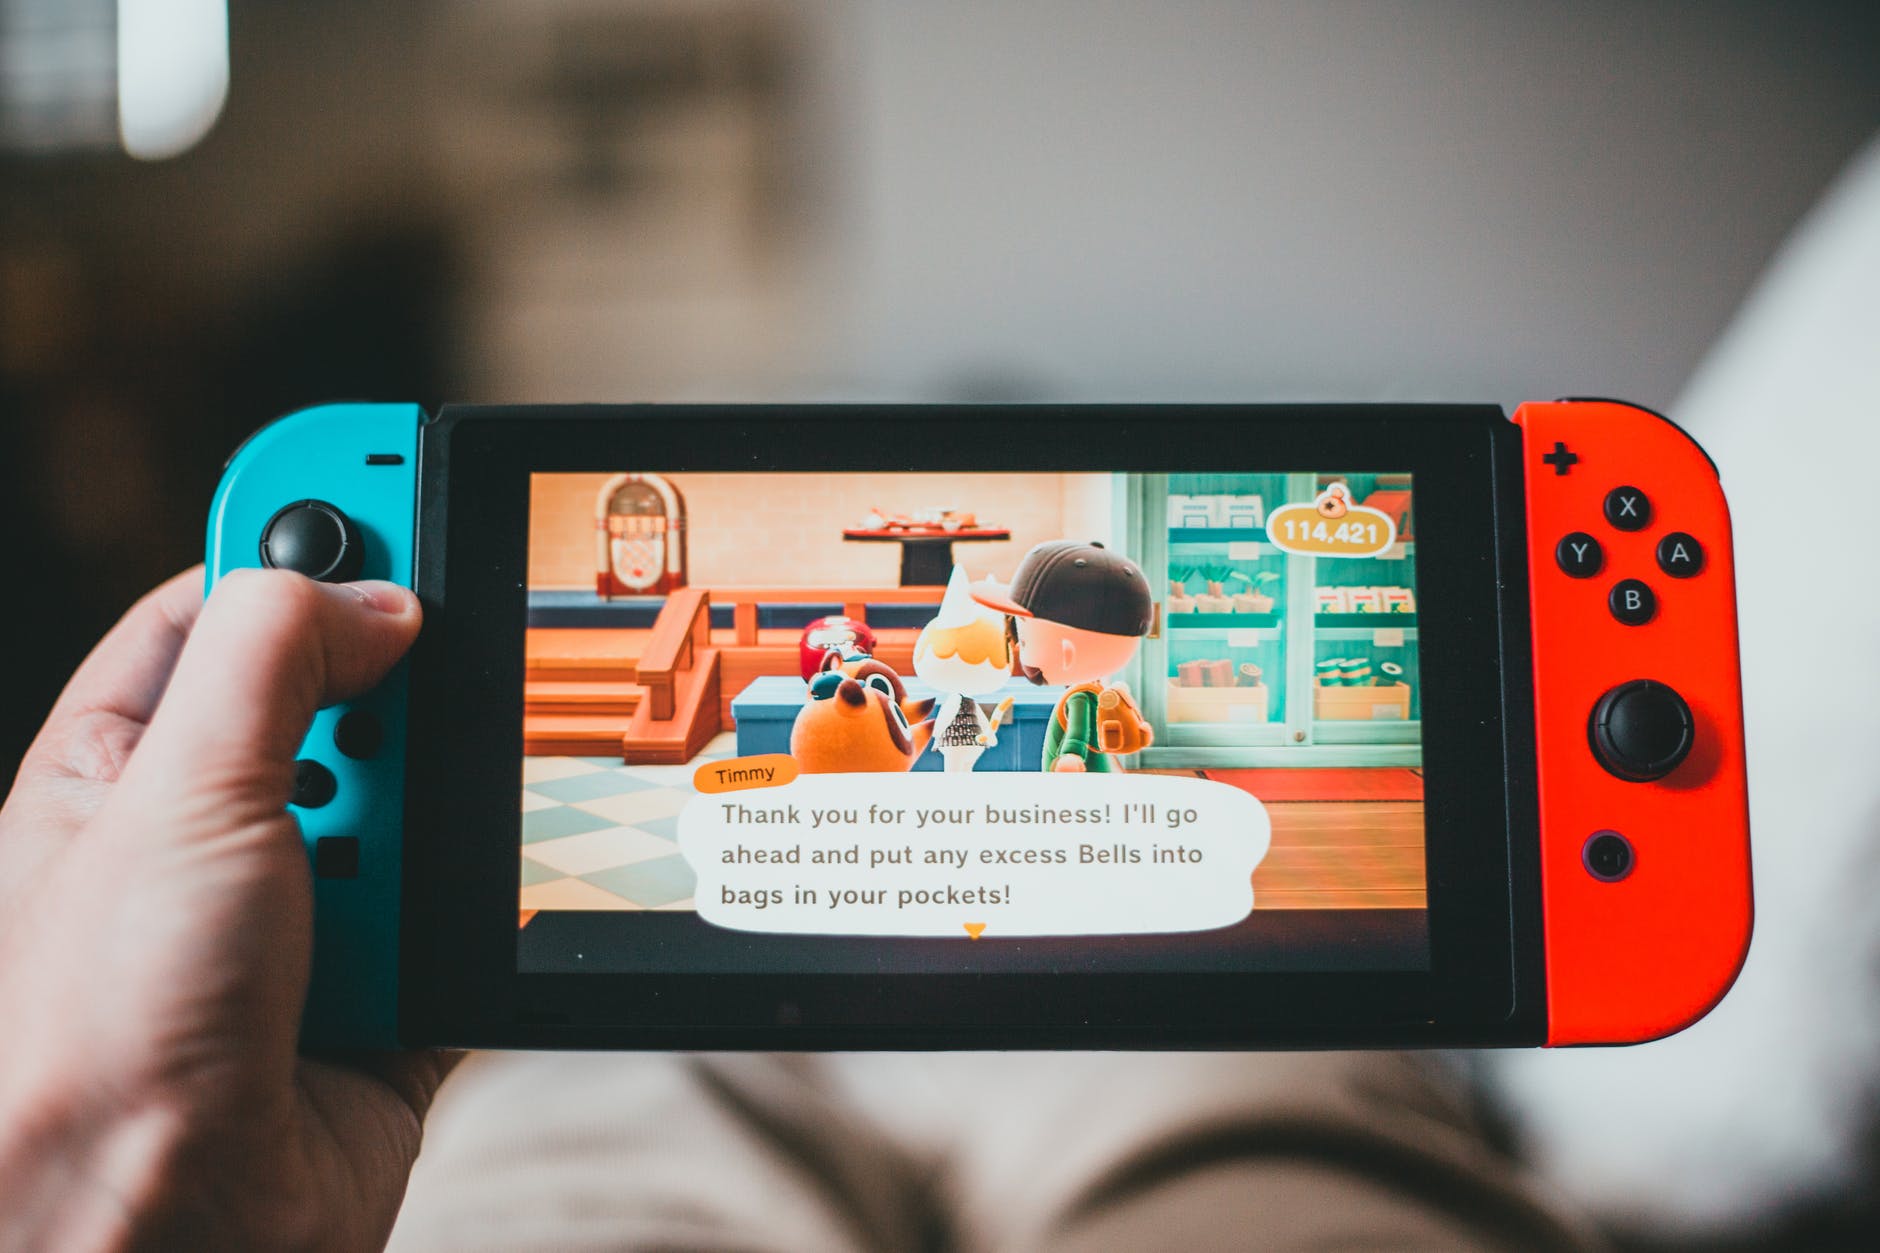 Crop of person using Nintendo Switch game console. It has characters on the screen in a conversation.